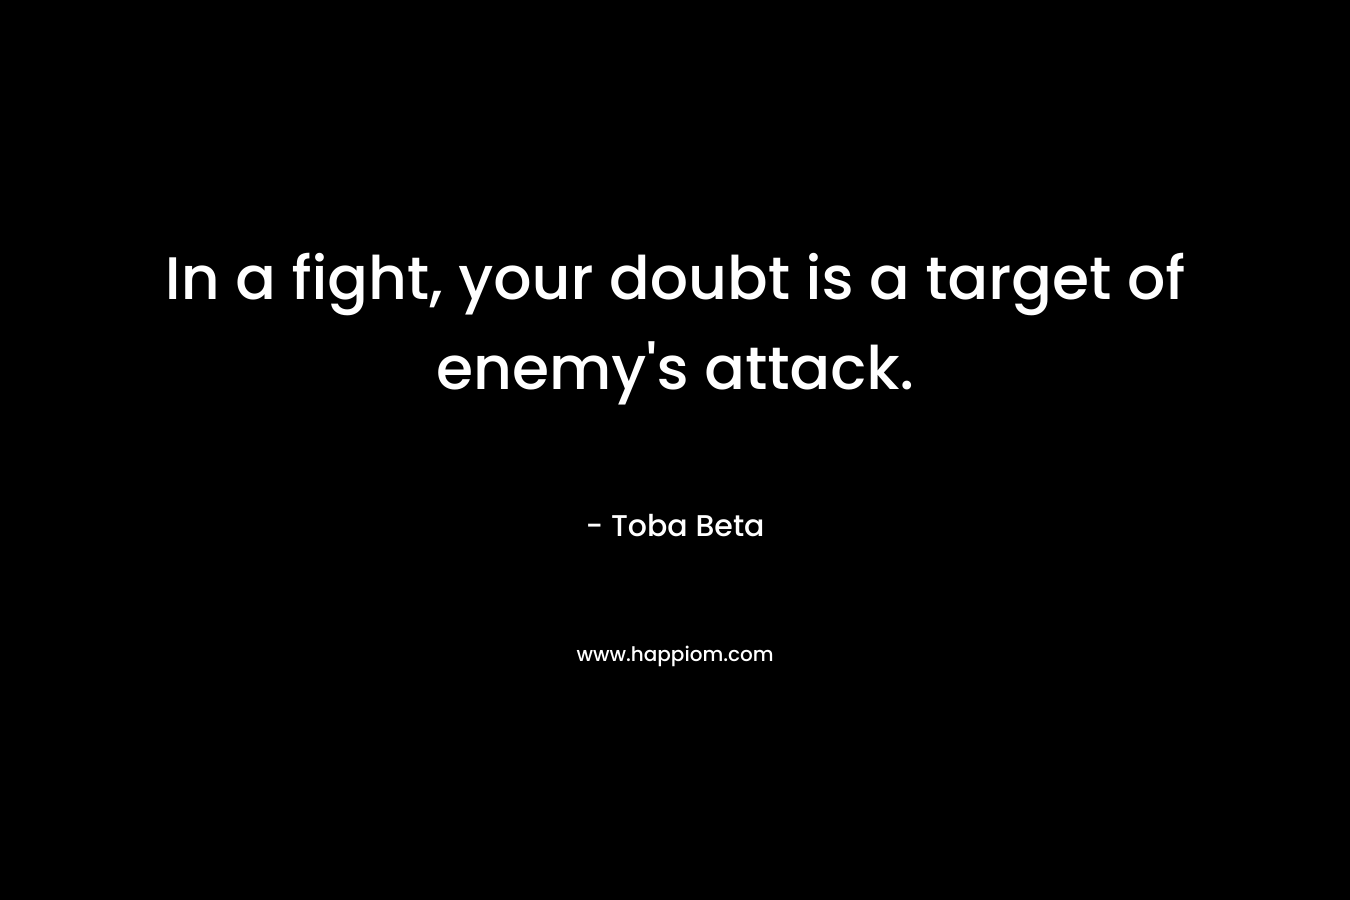 In a fight, your doubt is a target of enemy’s attack. – Toba Beta